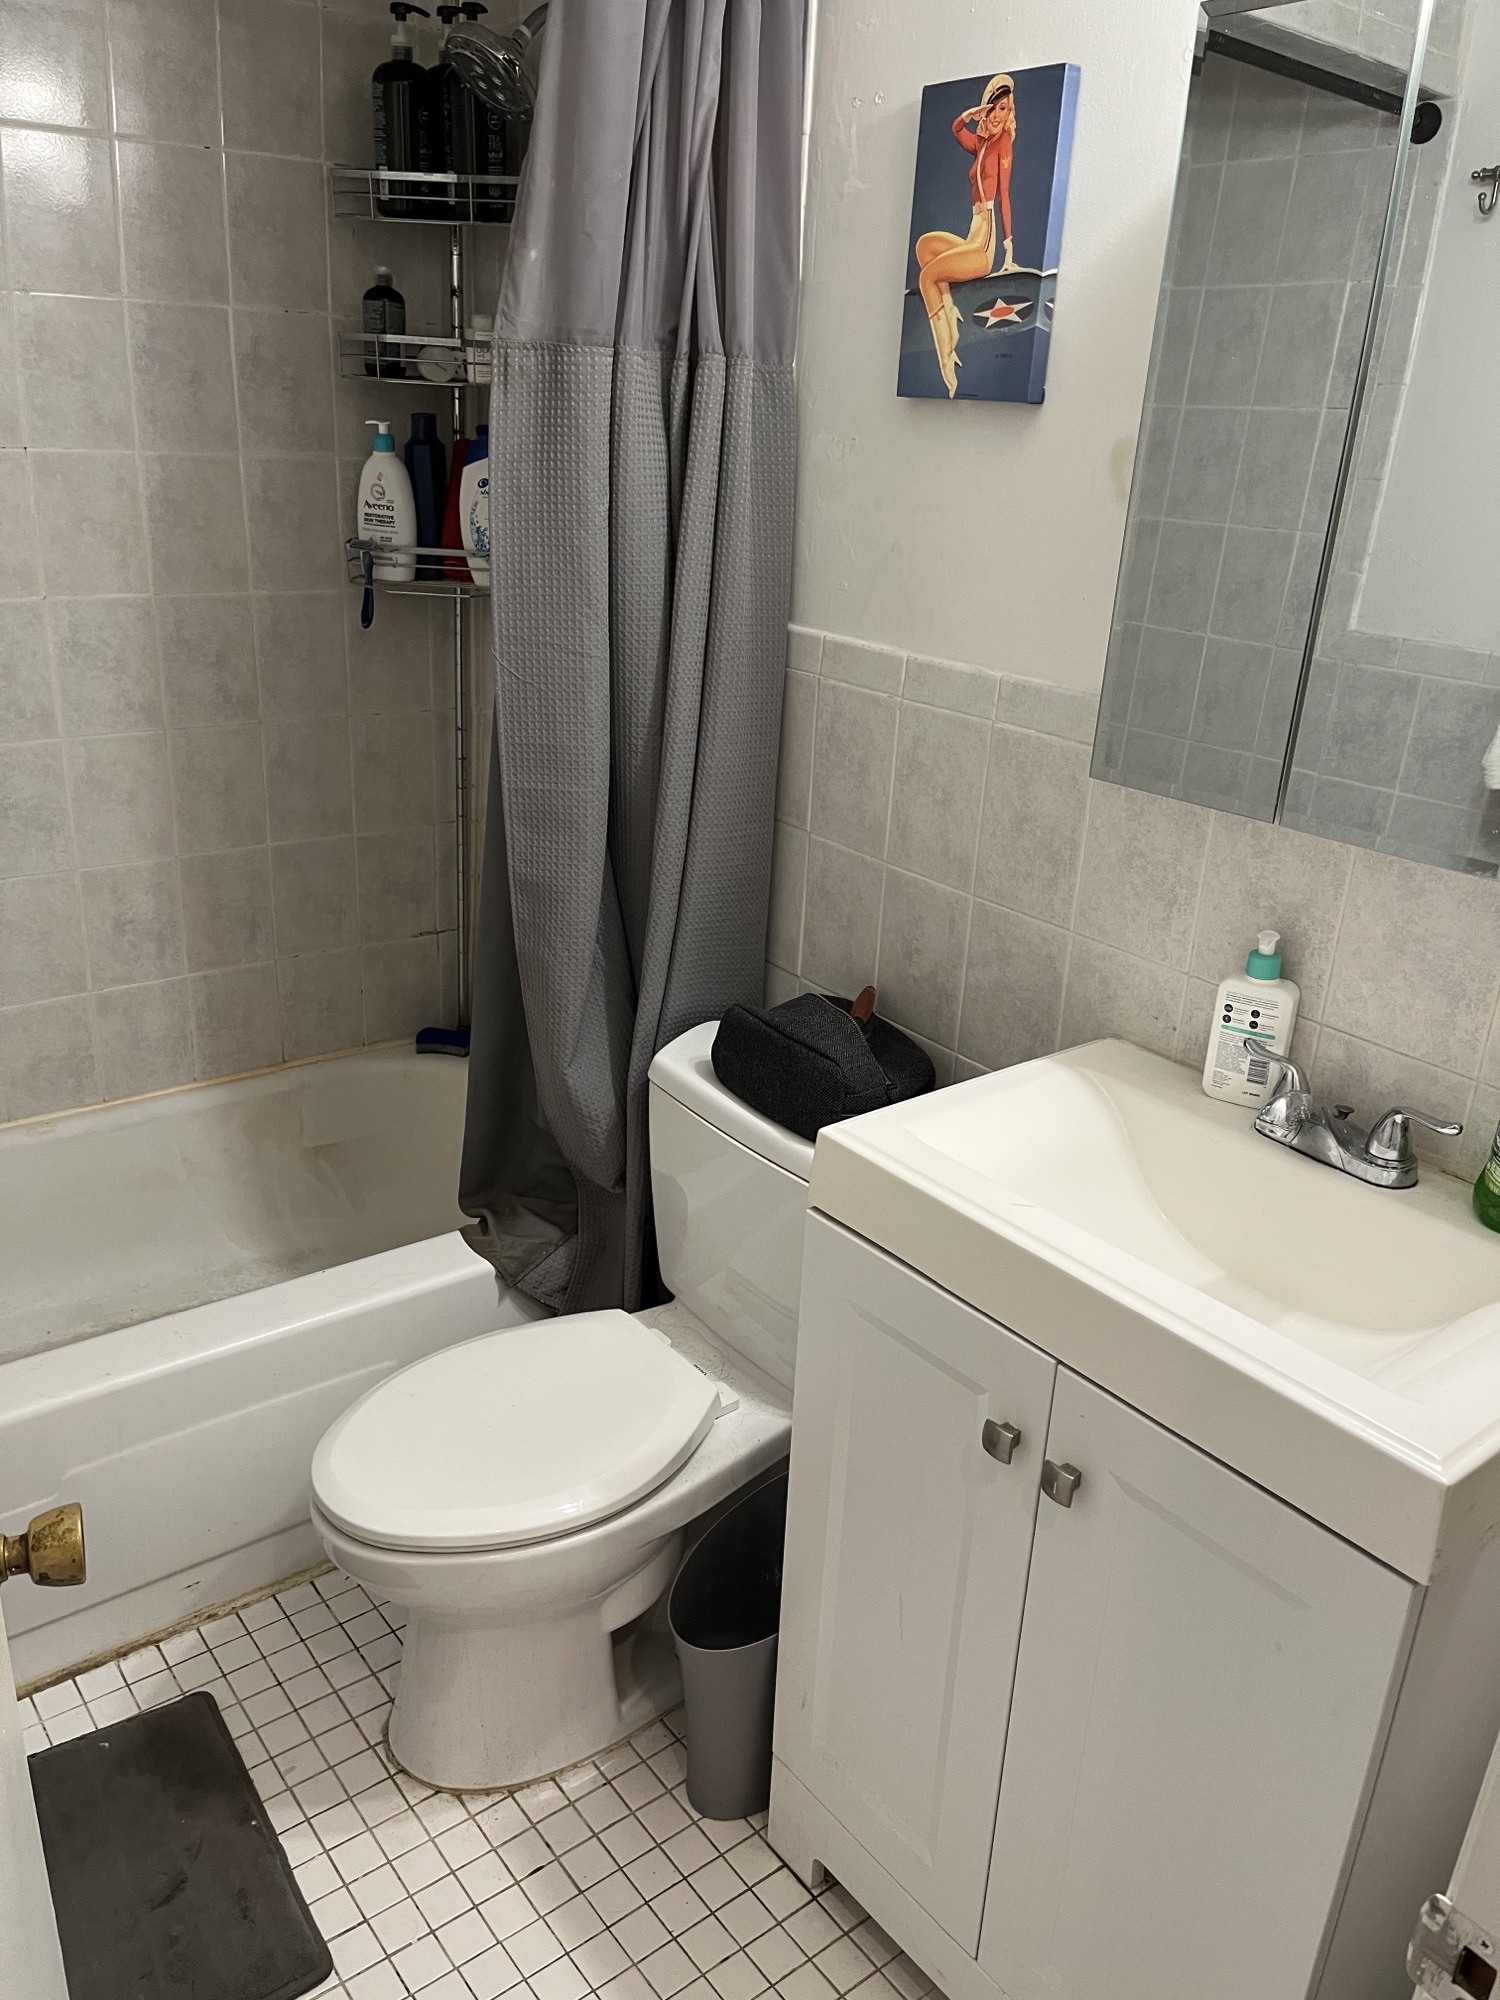 2 Beds, 1 Bath apartment in Boston, North End for $3,000